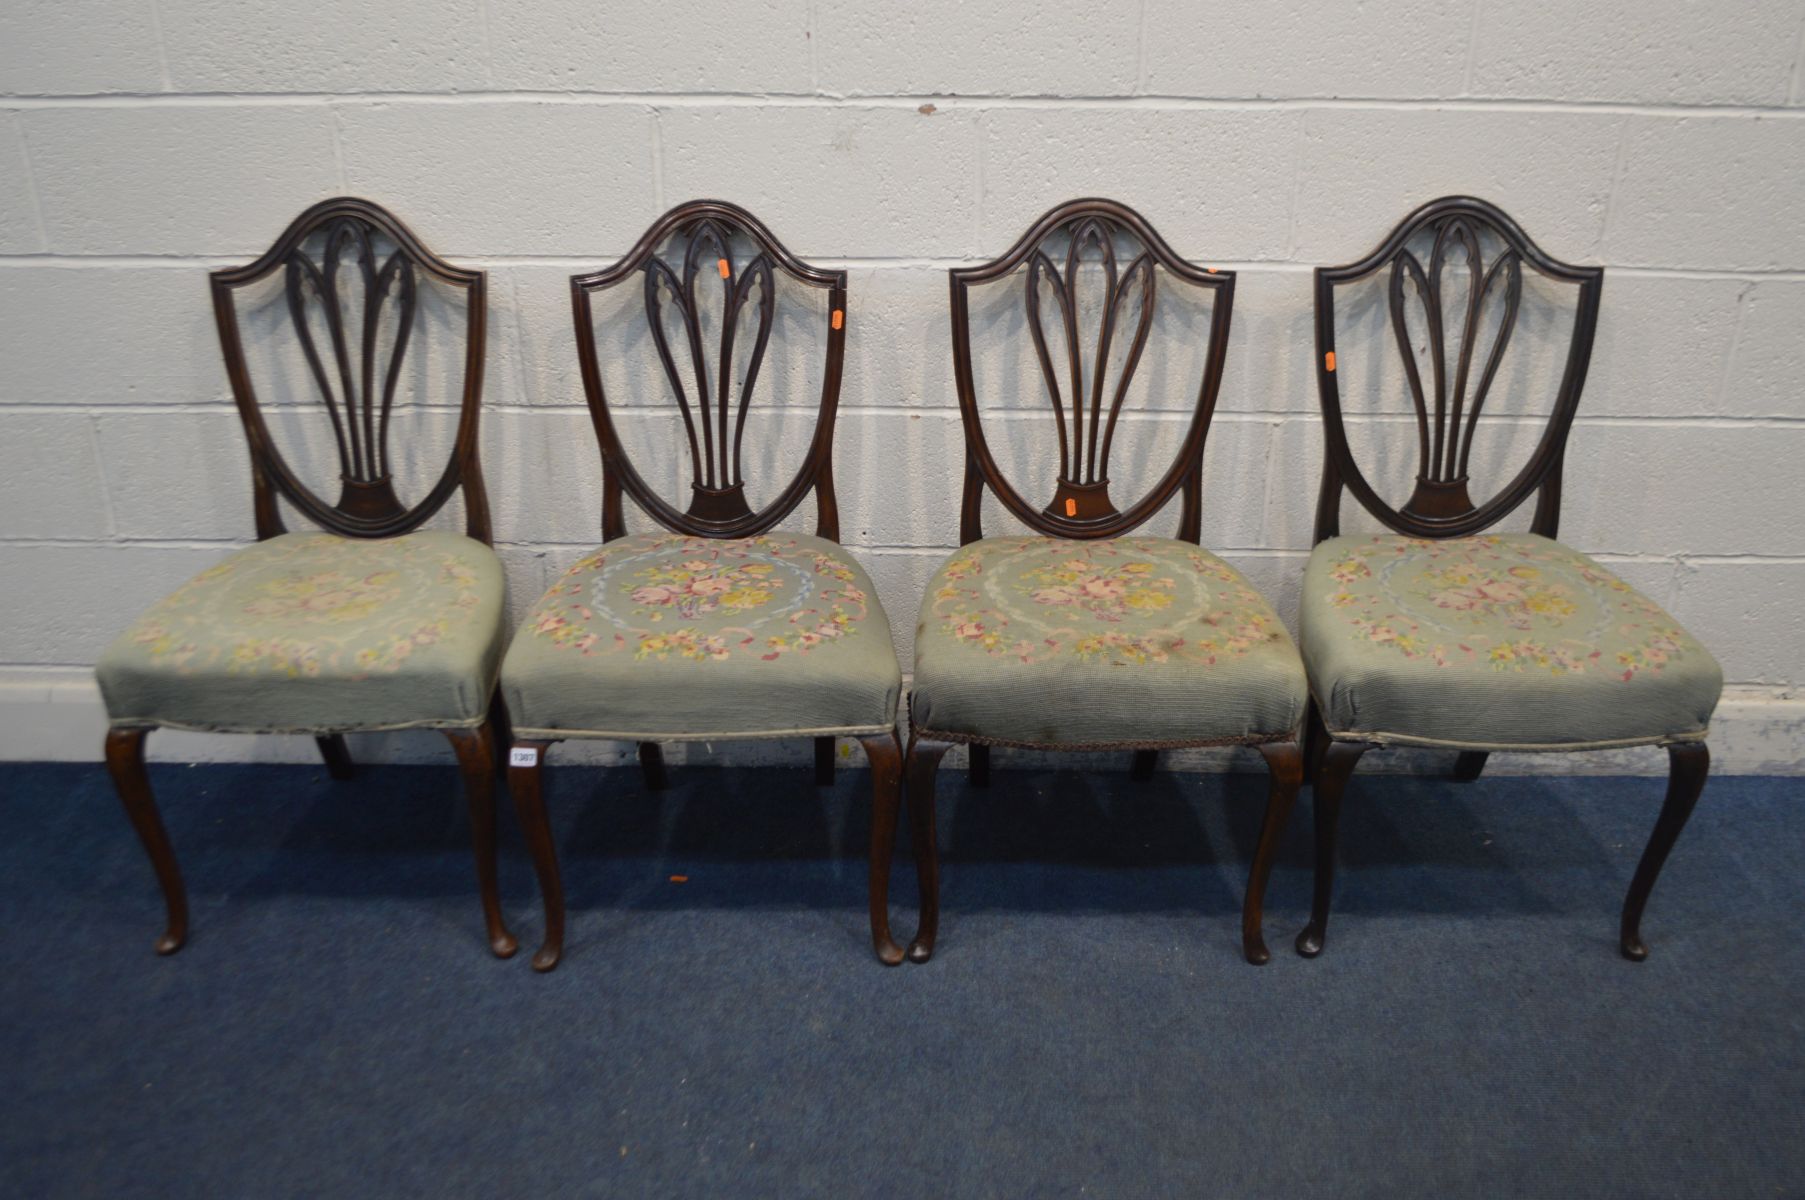 A SET OF FOUR 19TH CENTURY MAHOGANY CHAIRS, with a gothic style back, needlework upholstery on